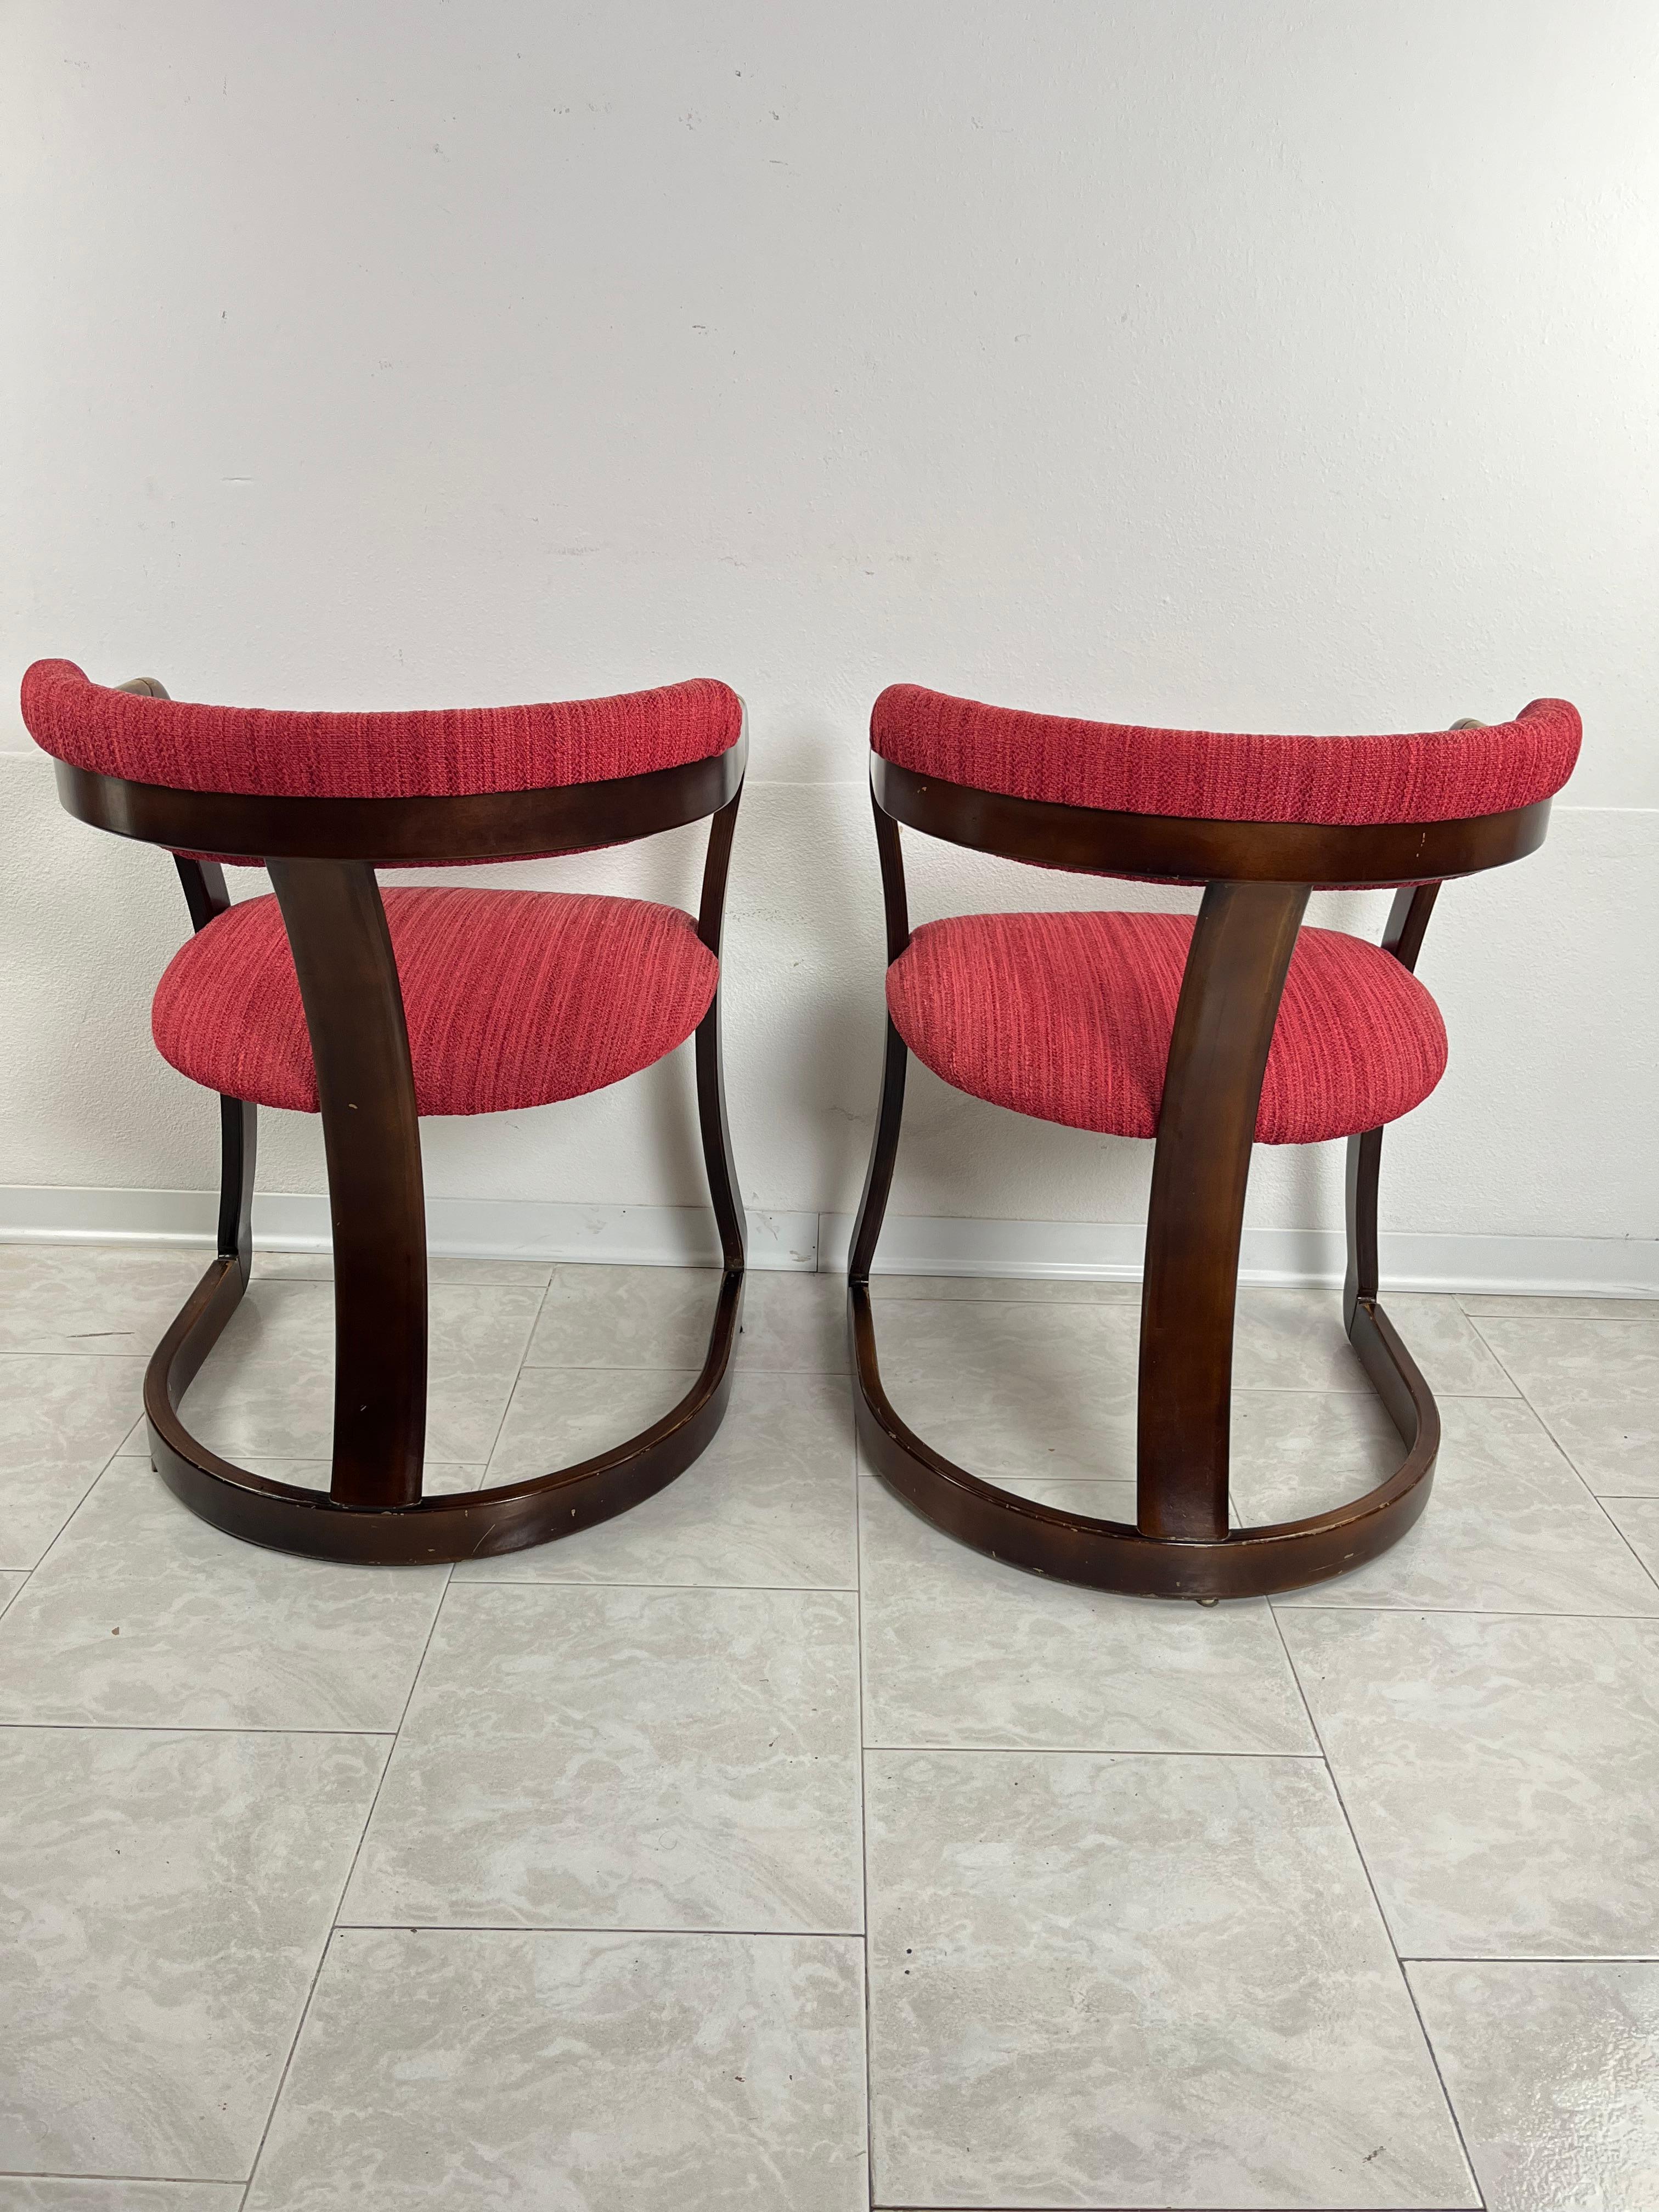 Set of 2 Mid-Century Curved Wooden Chairs Attributed to A. & P. Castiglioni In Good Condition For Sale In Palermo, IT